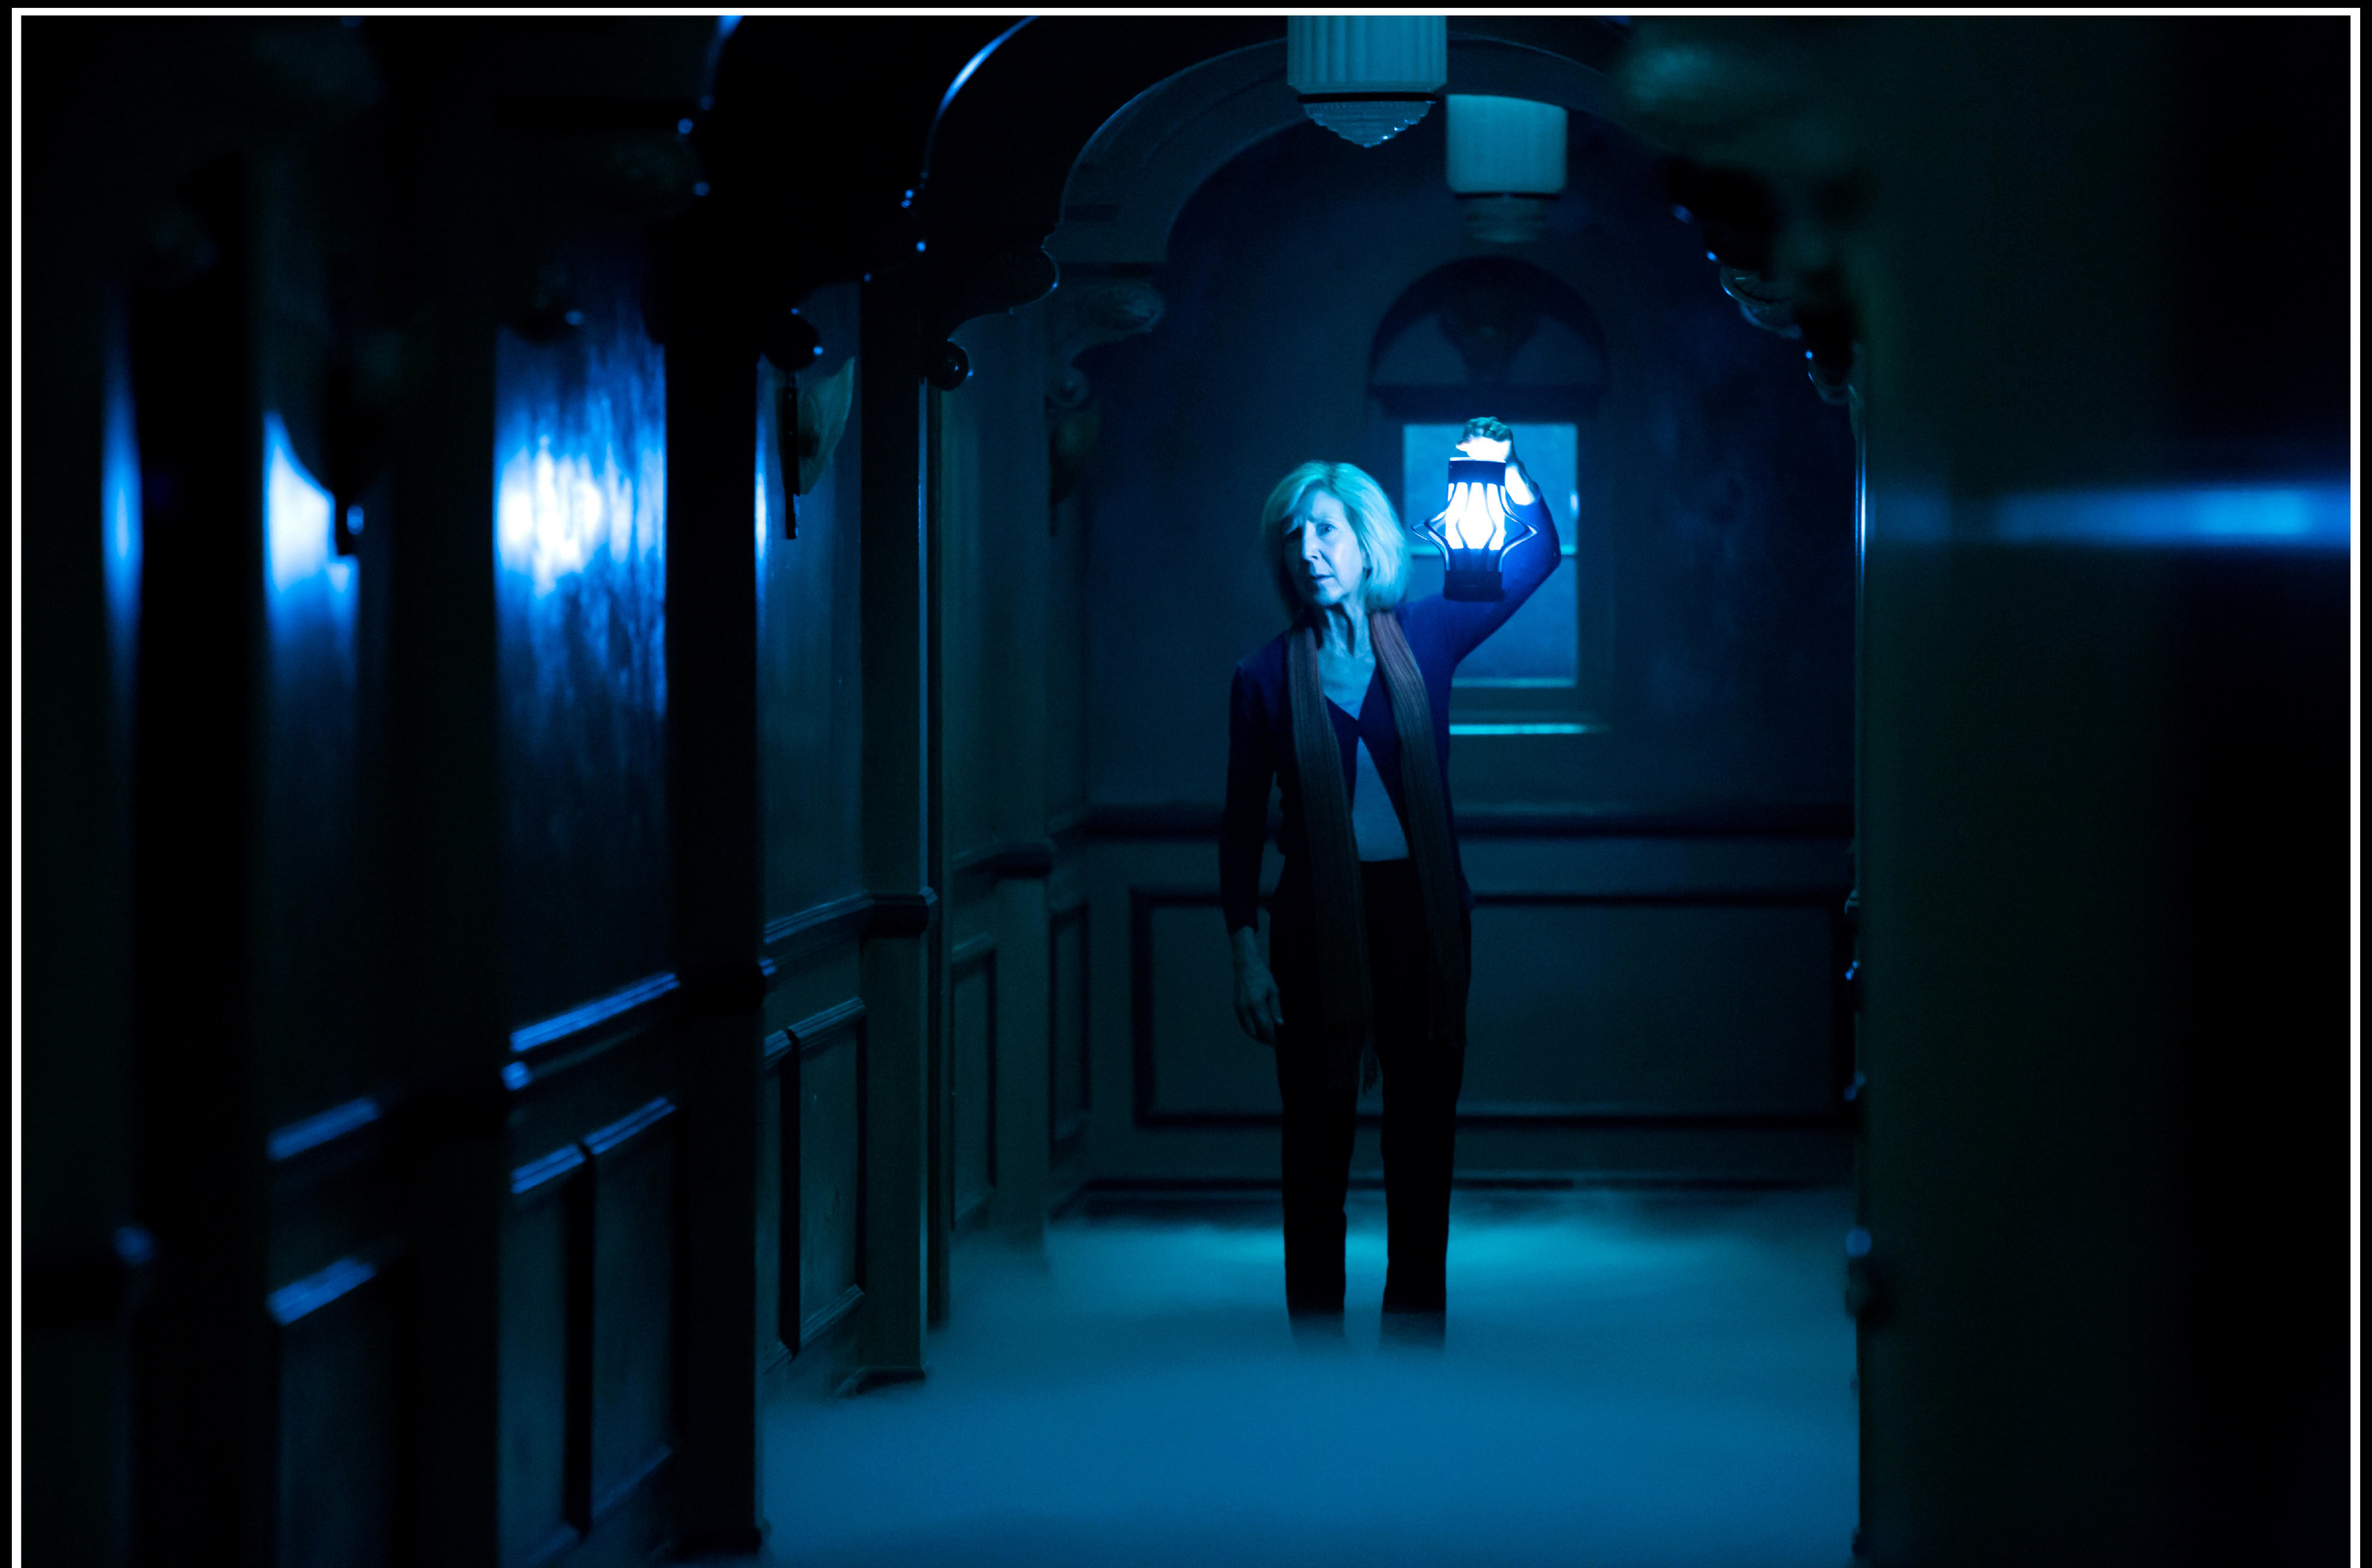 Lin Shaye raises a lantern in a foggy otherworldly hallway in &quot;Insidious: Chapter 3&quot;